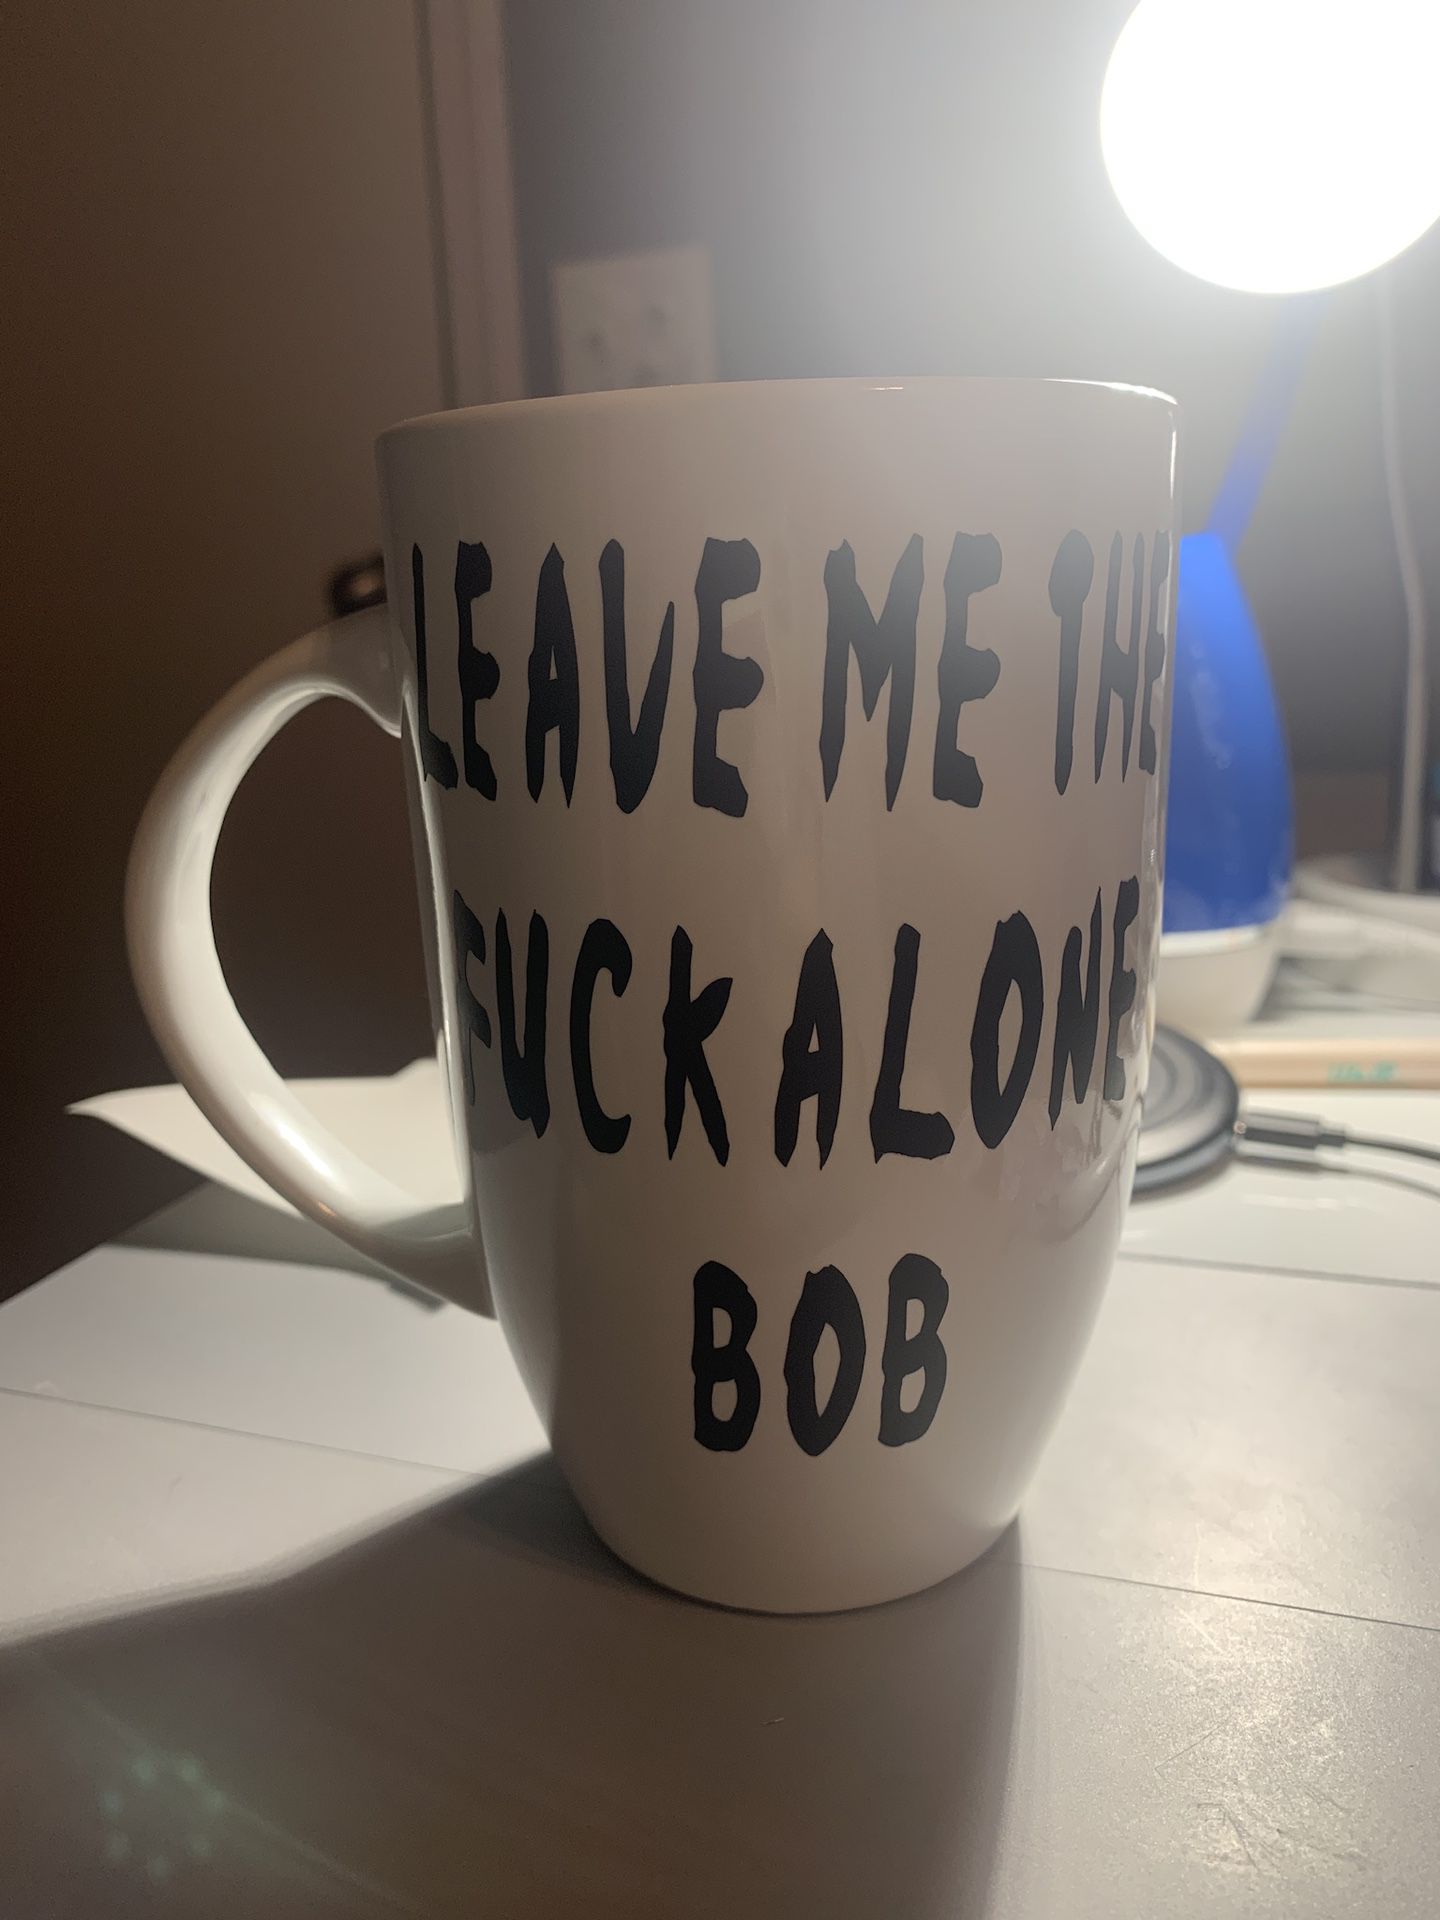 Personalized coffee cups and mugs